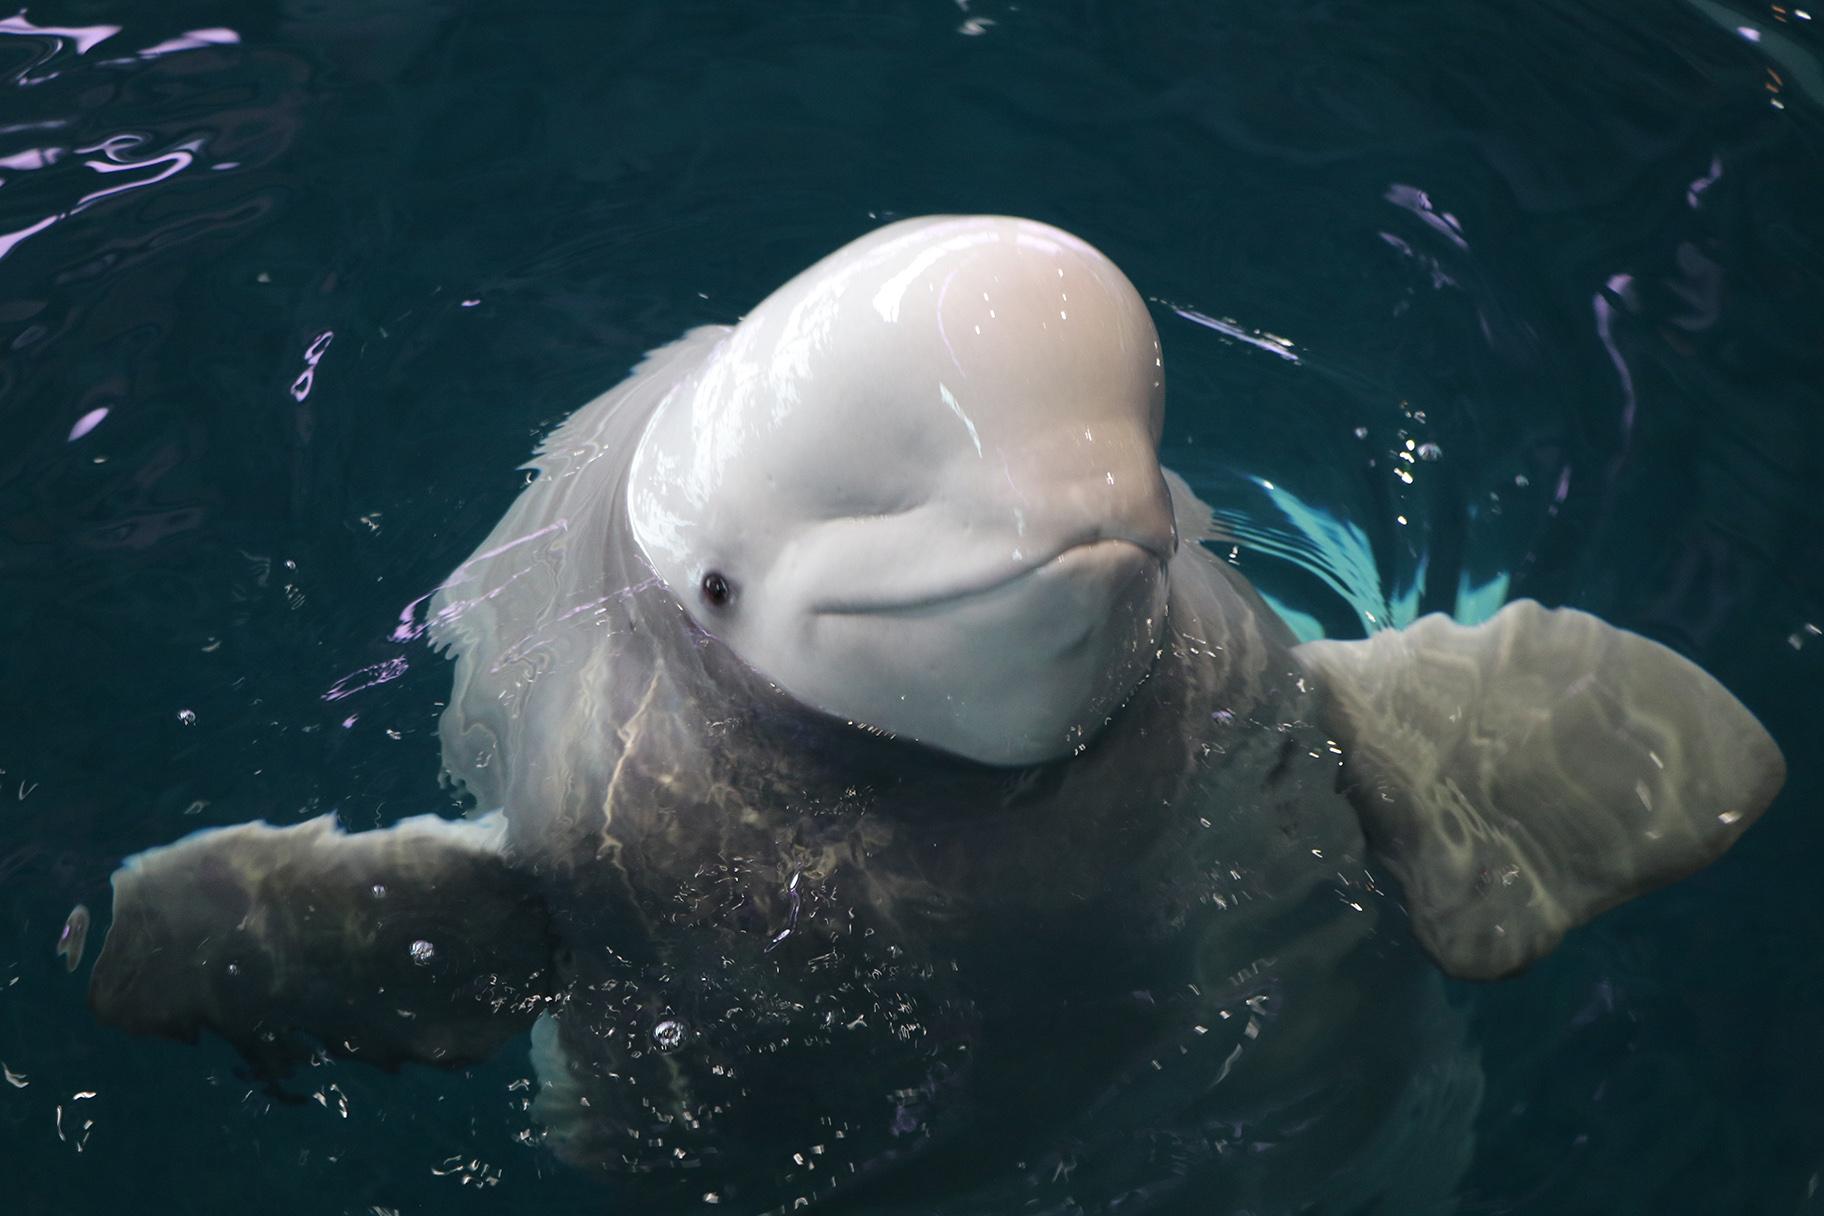 Mauyak, a Beluga whale, greets WTTW News inside Shedd’s oceanarium. At the time, she was pregnant. (Evan Garcia / WTTW News) 